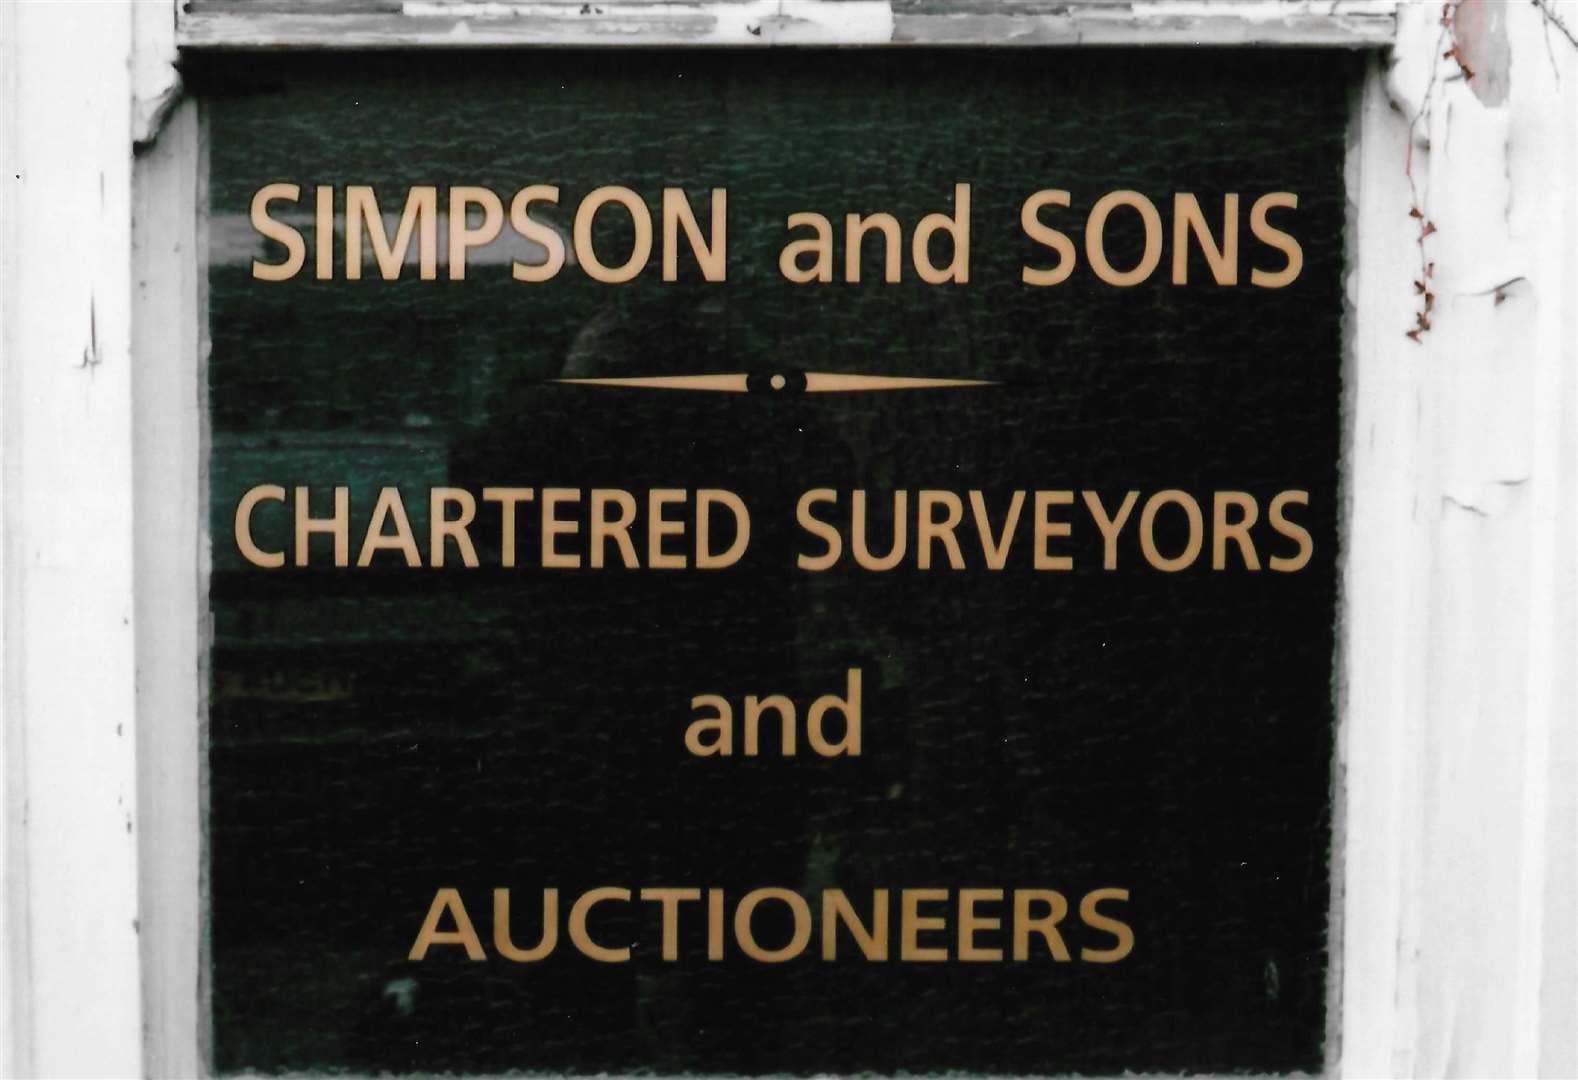 Simpson and Sons were finally based in St Andrew's Street South, Bury St Edmunds